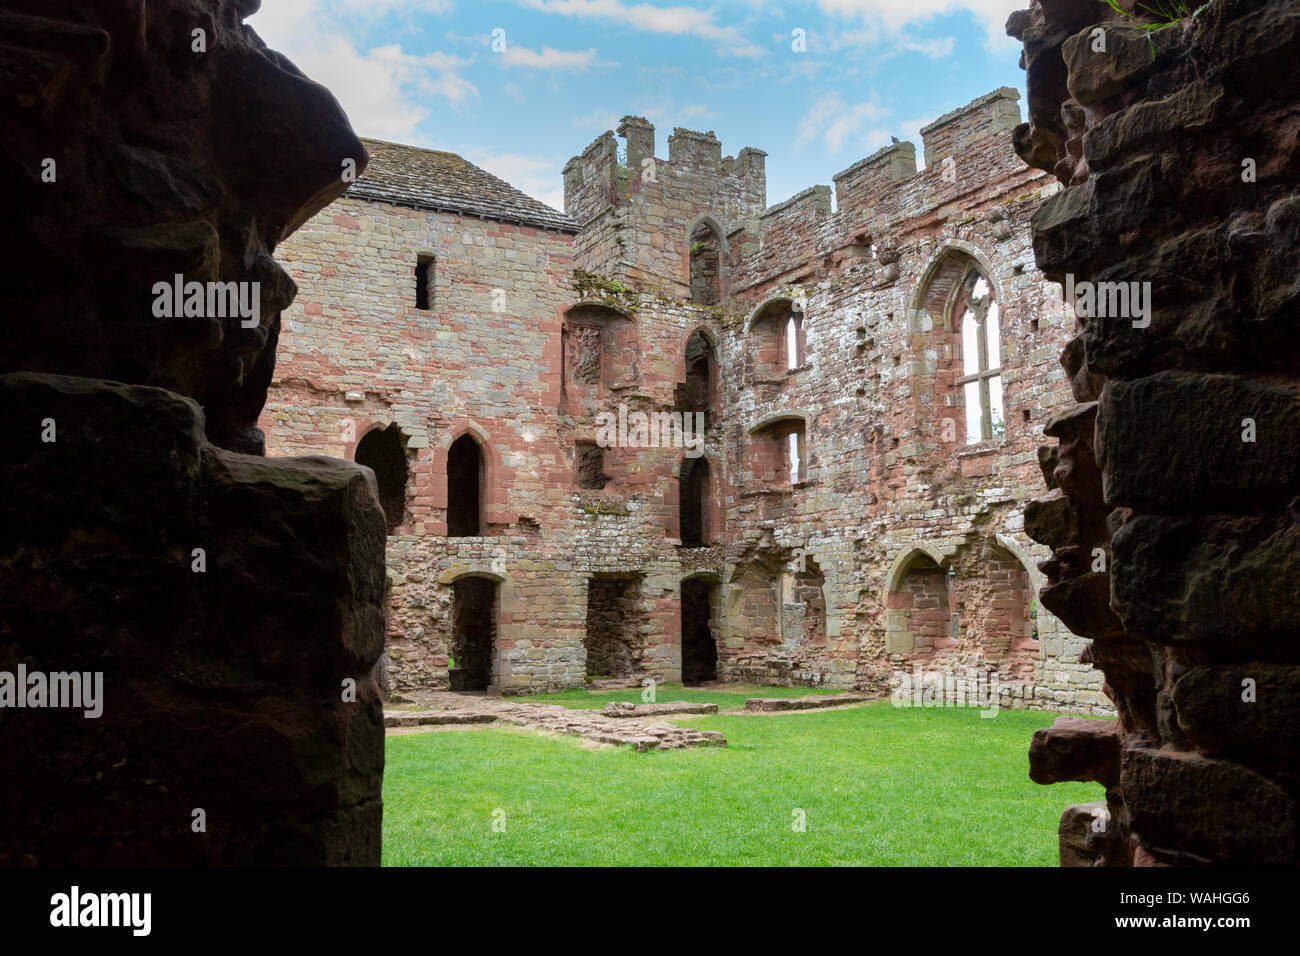 Acton Burnell Castle, a 13th-century fortified manor house, located near the village of Acton Burnell, Shropshire, England, UK Stock Photo